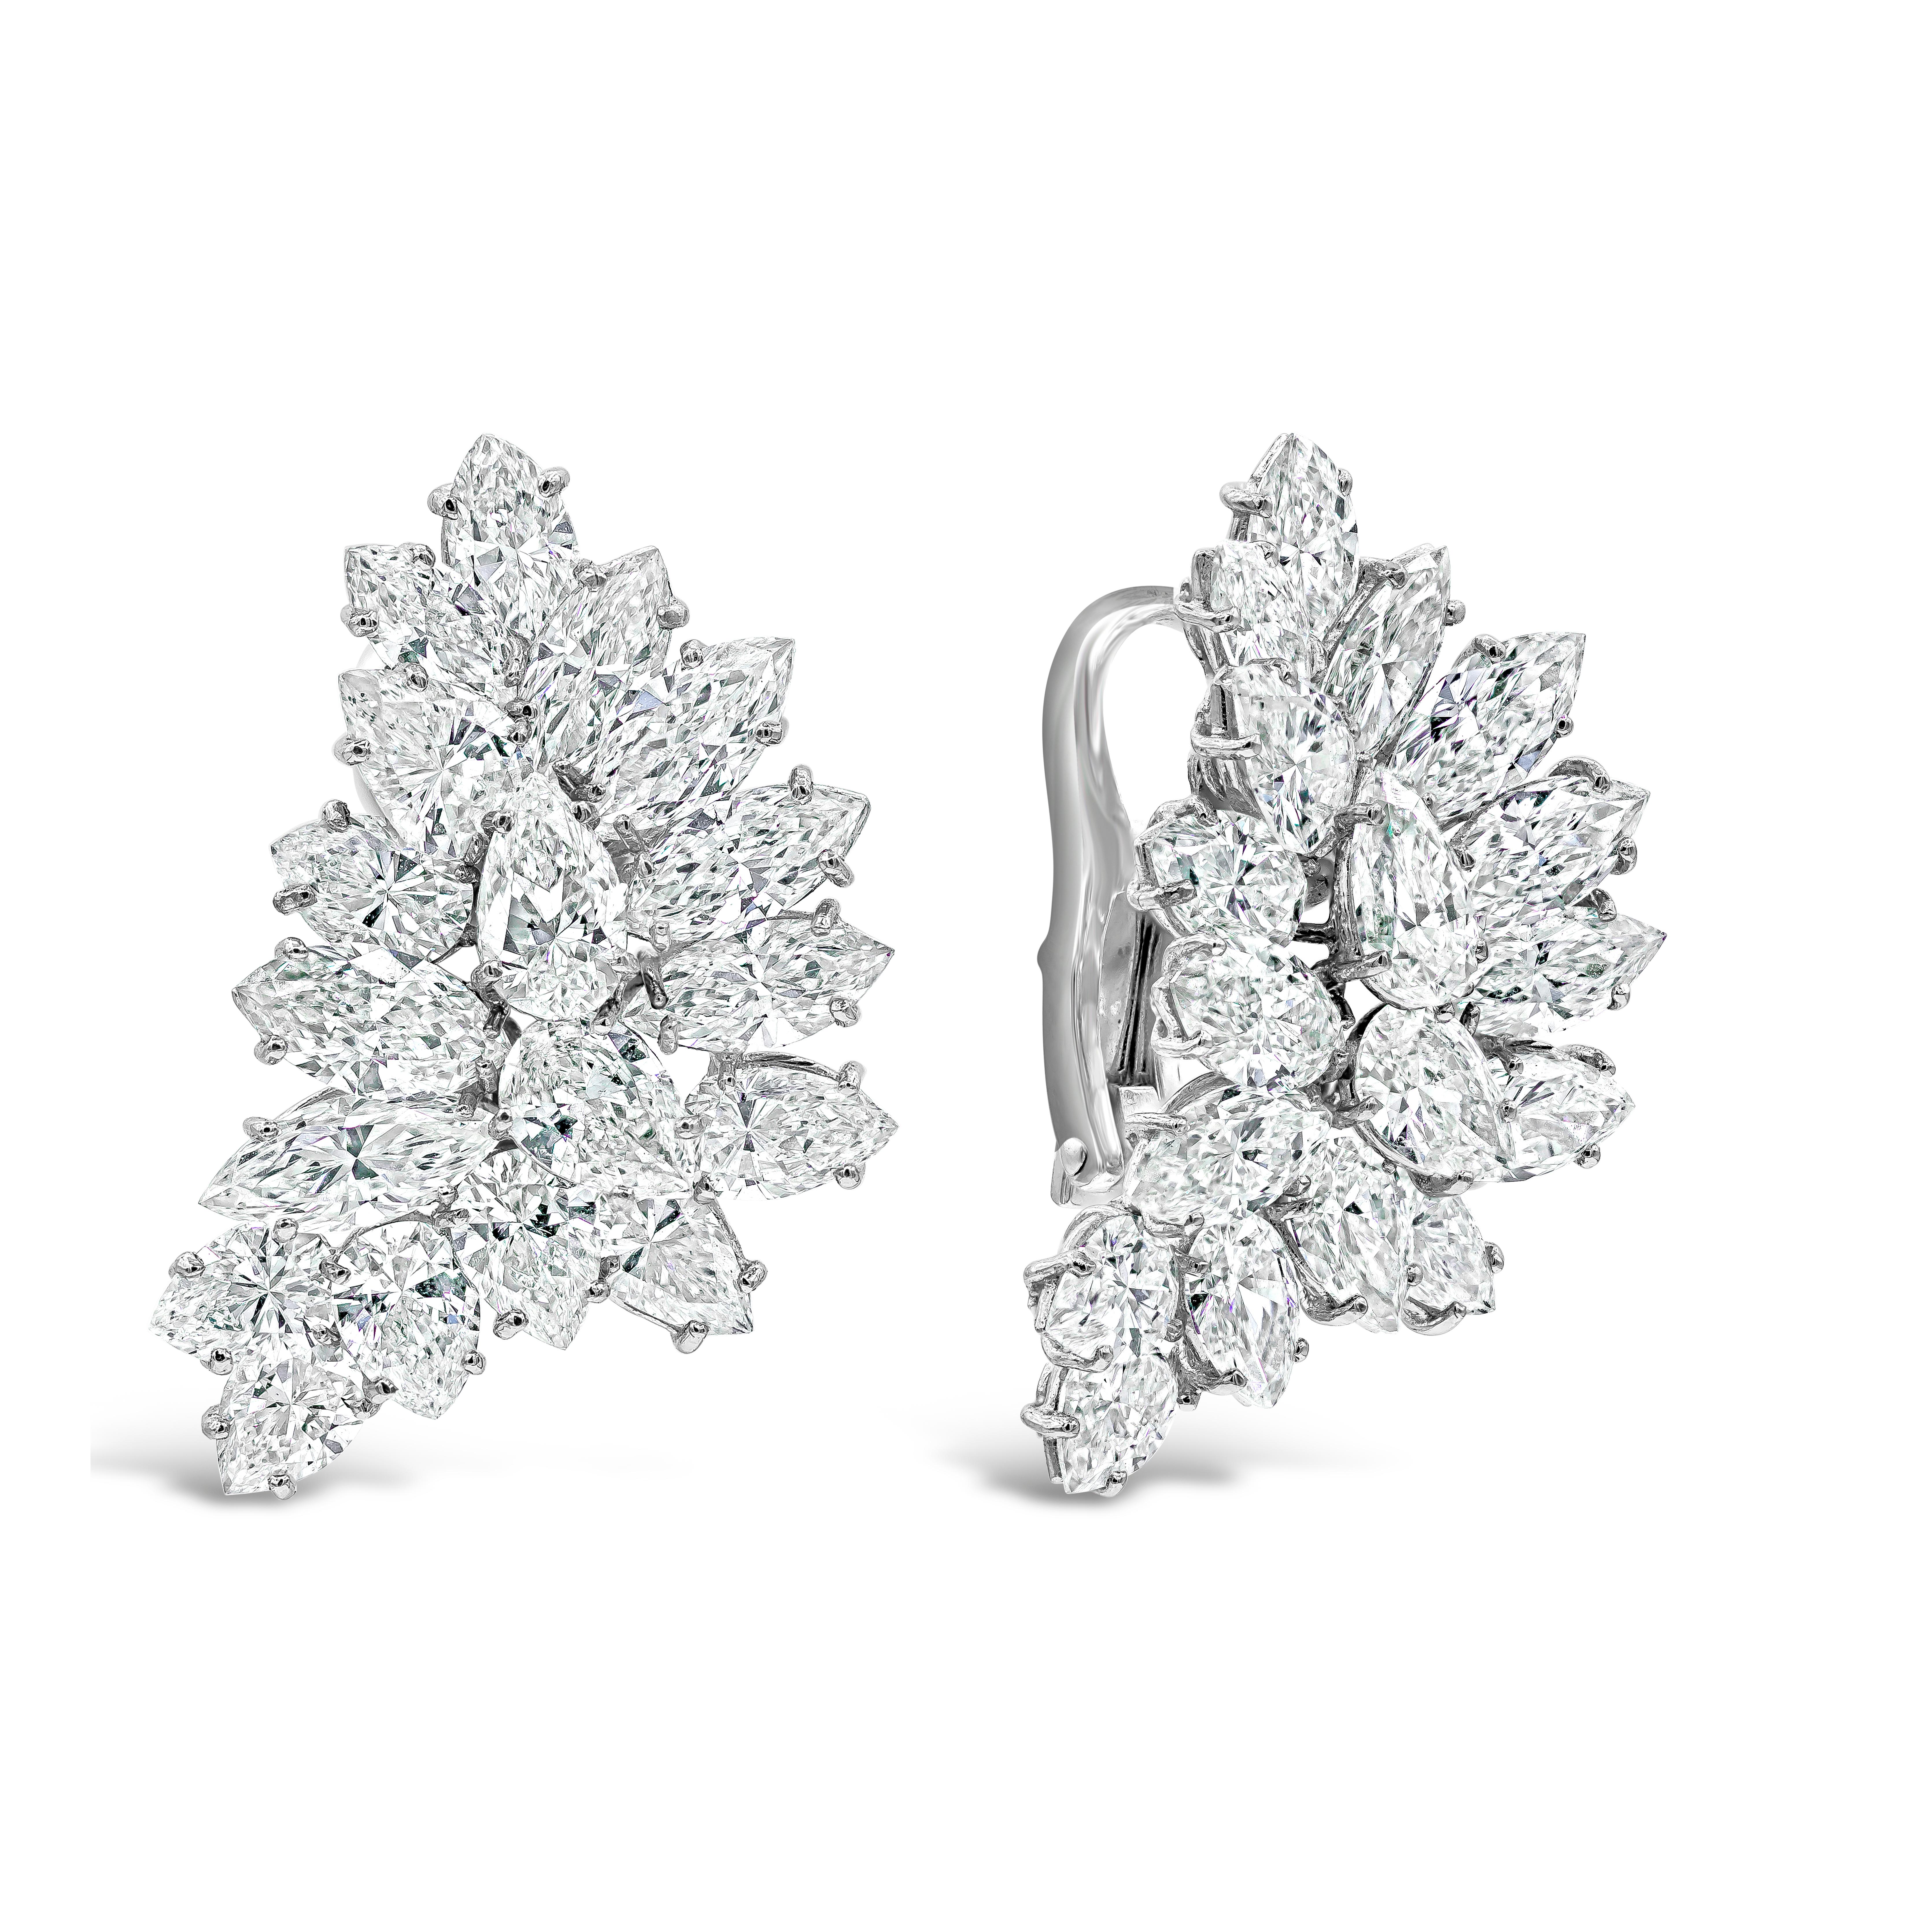 A brilliant pair of earrings showcasing pear and marquise shape diamonds set in an elegant cluster design. Diamonds weigh 15.35 carats total. Made in platinum. Omega Clip.

Style available in different price ranges. Prices are based on your